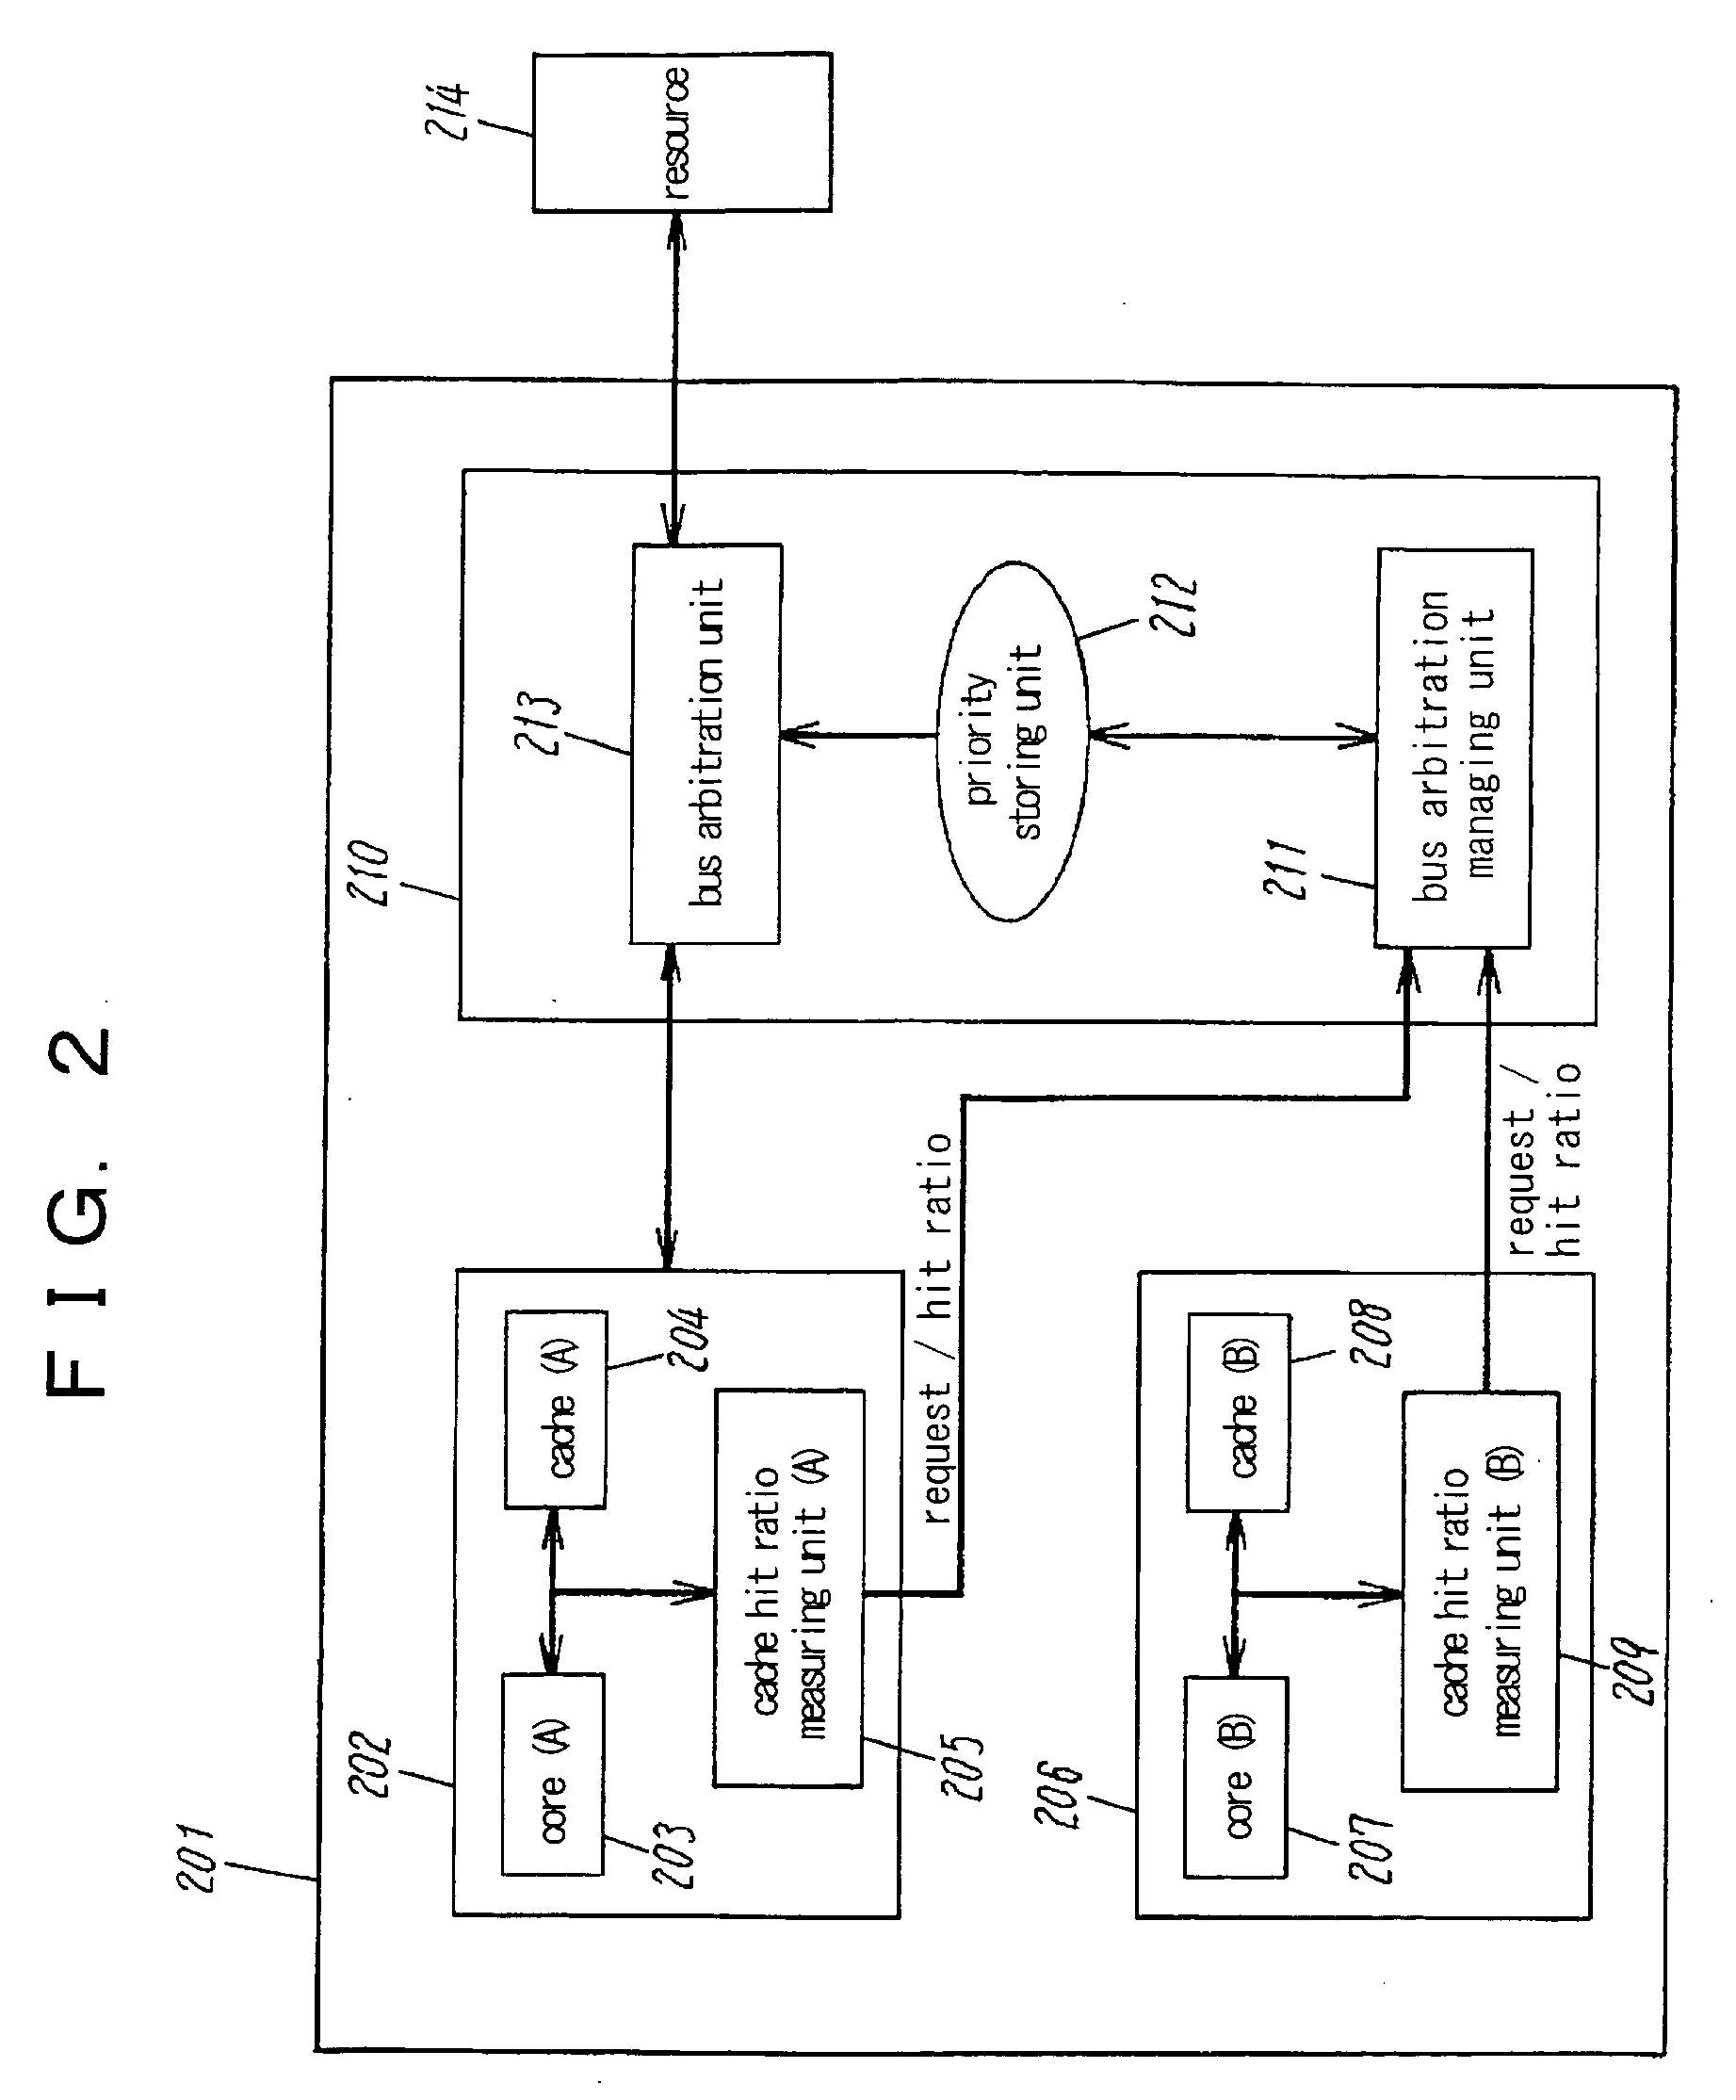 Bus arbitration method and semiconductor apparatus